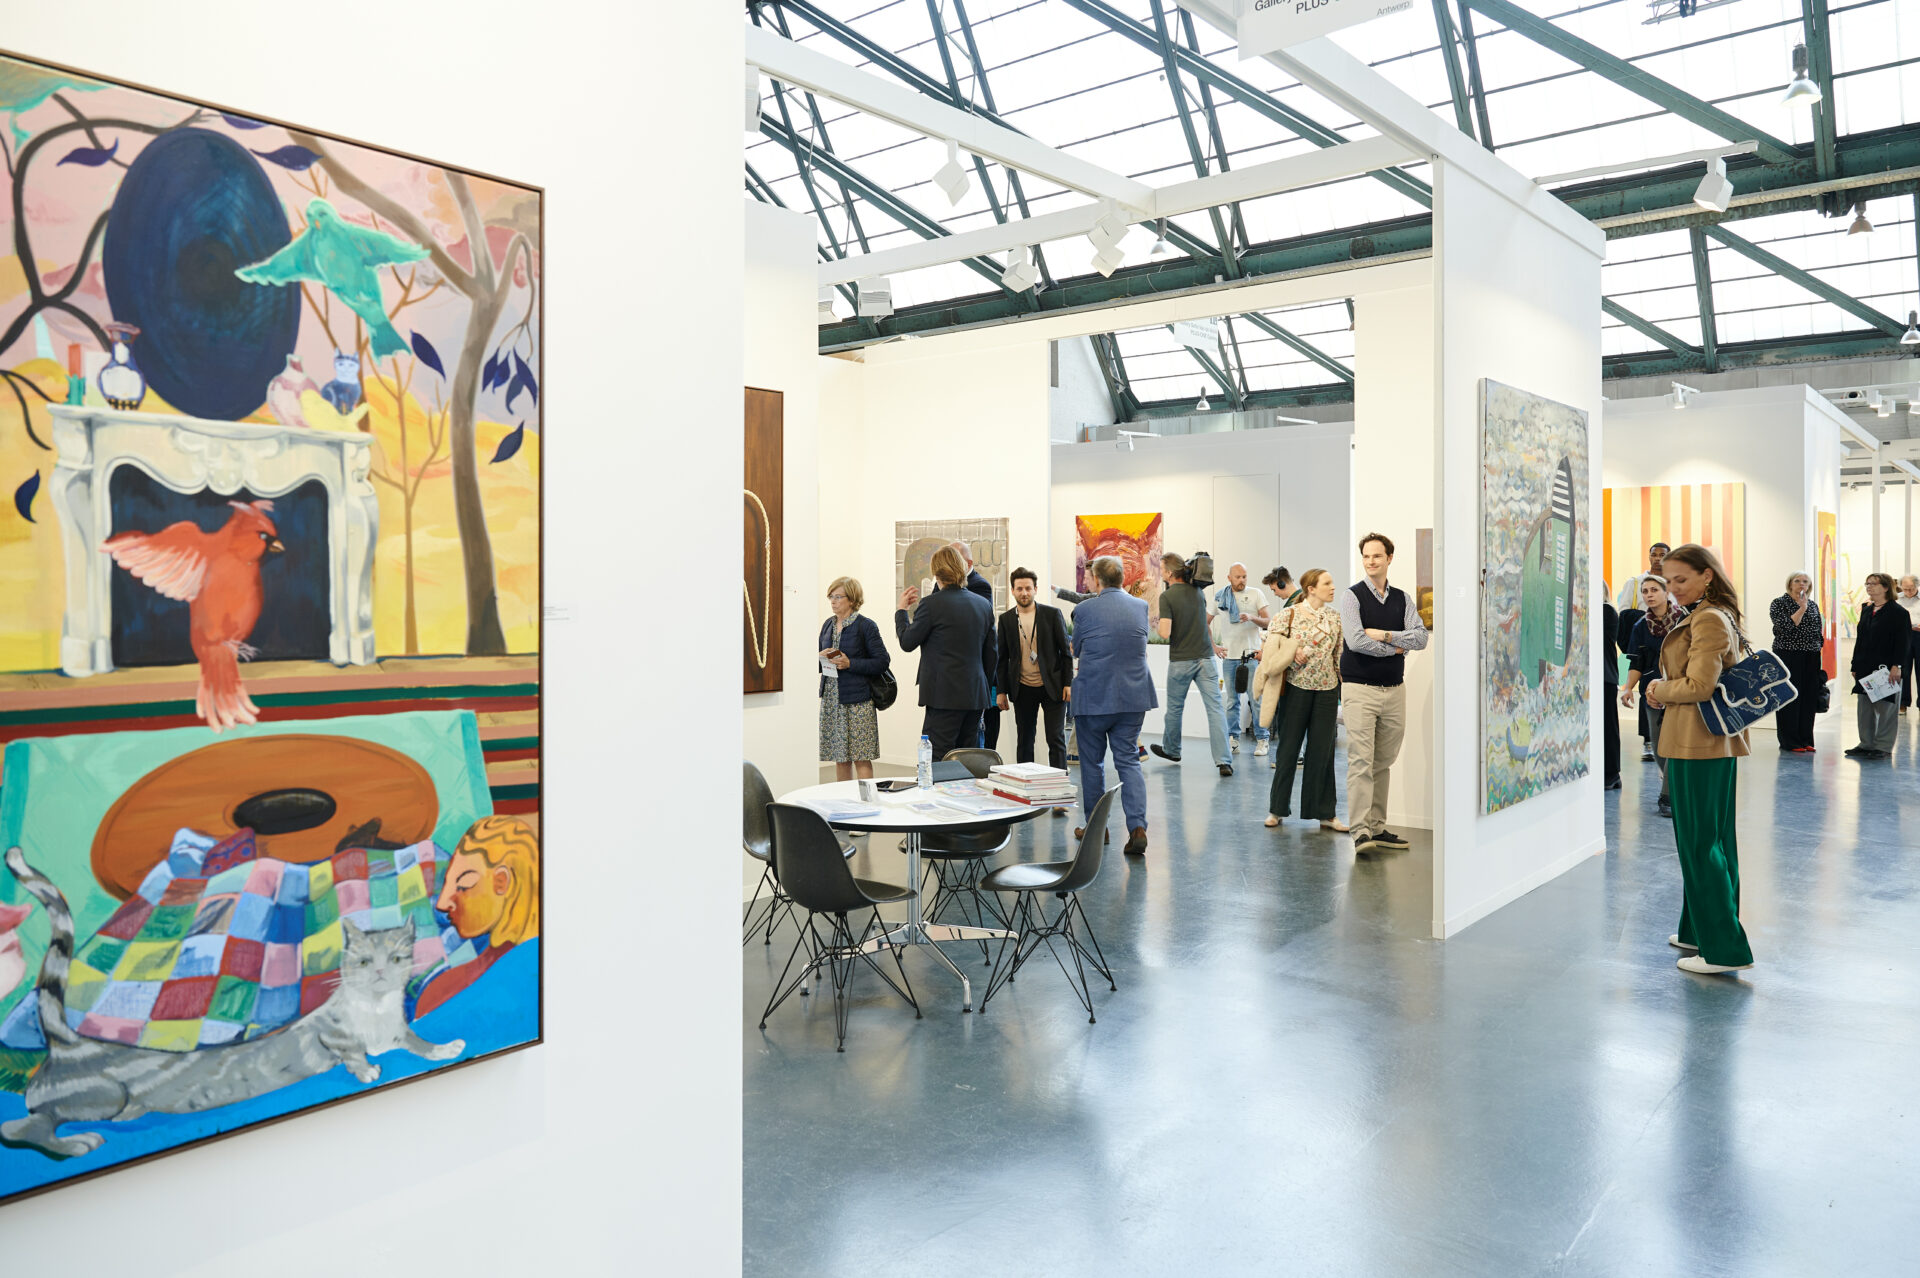 Art Brussels brings new and exciting art to Brussels for its 39th edition